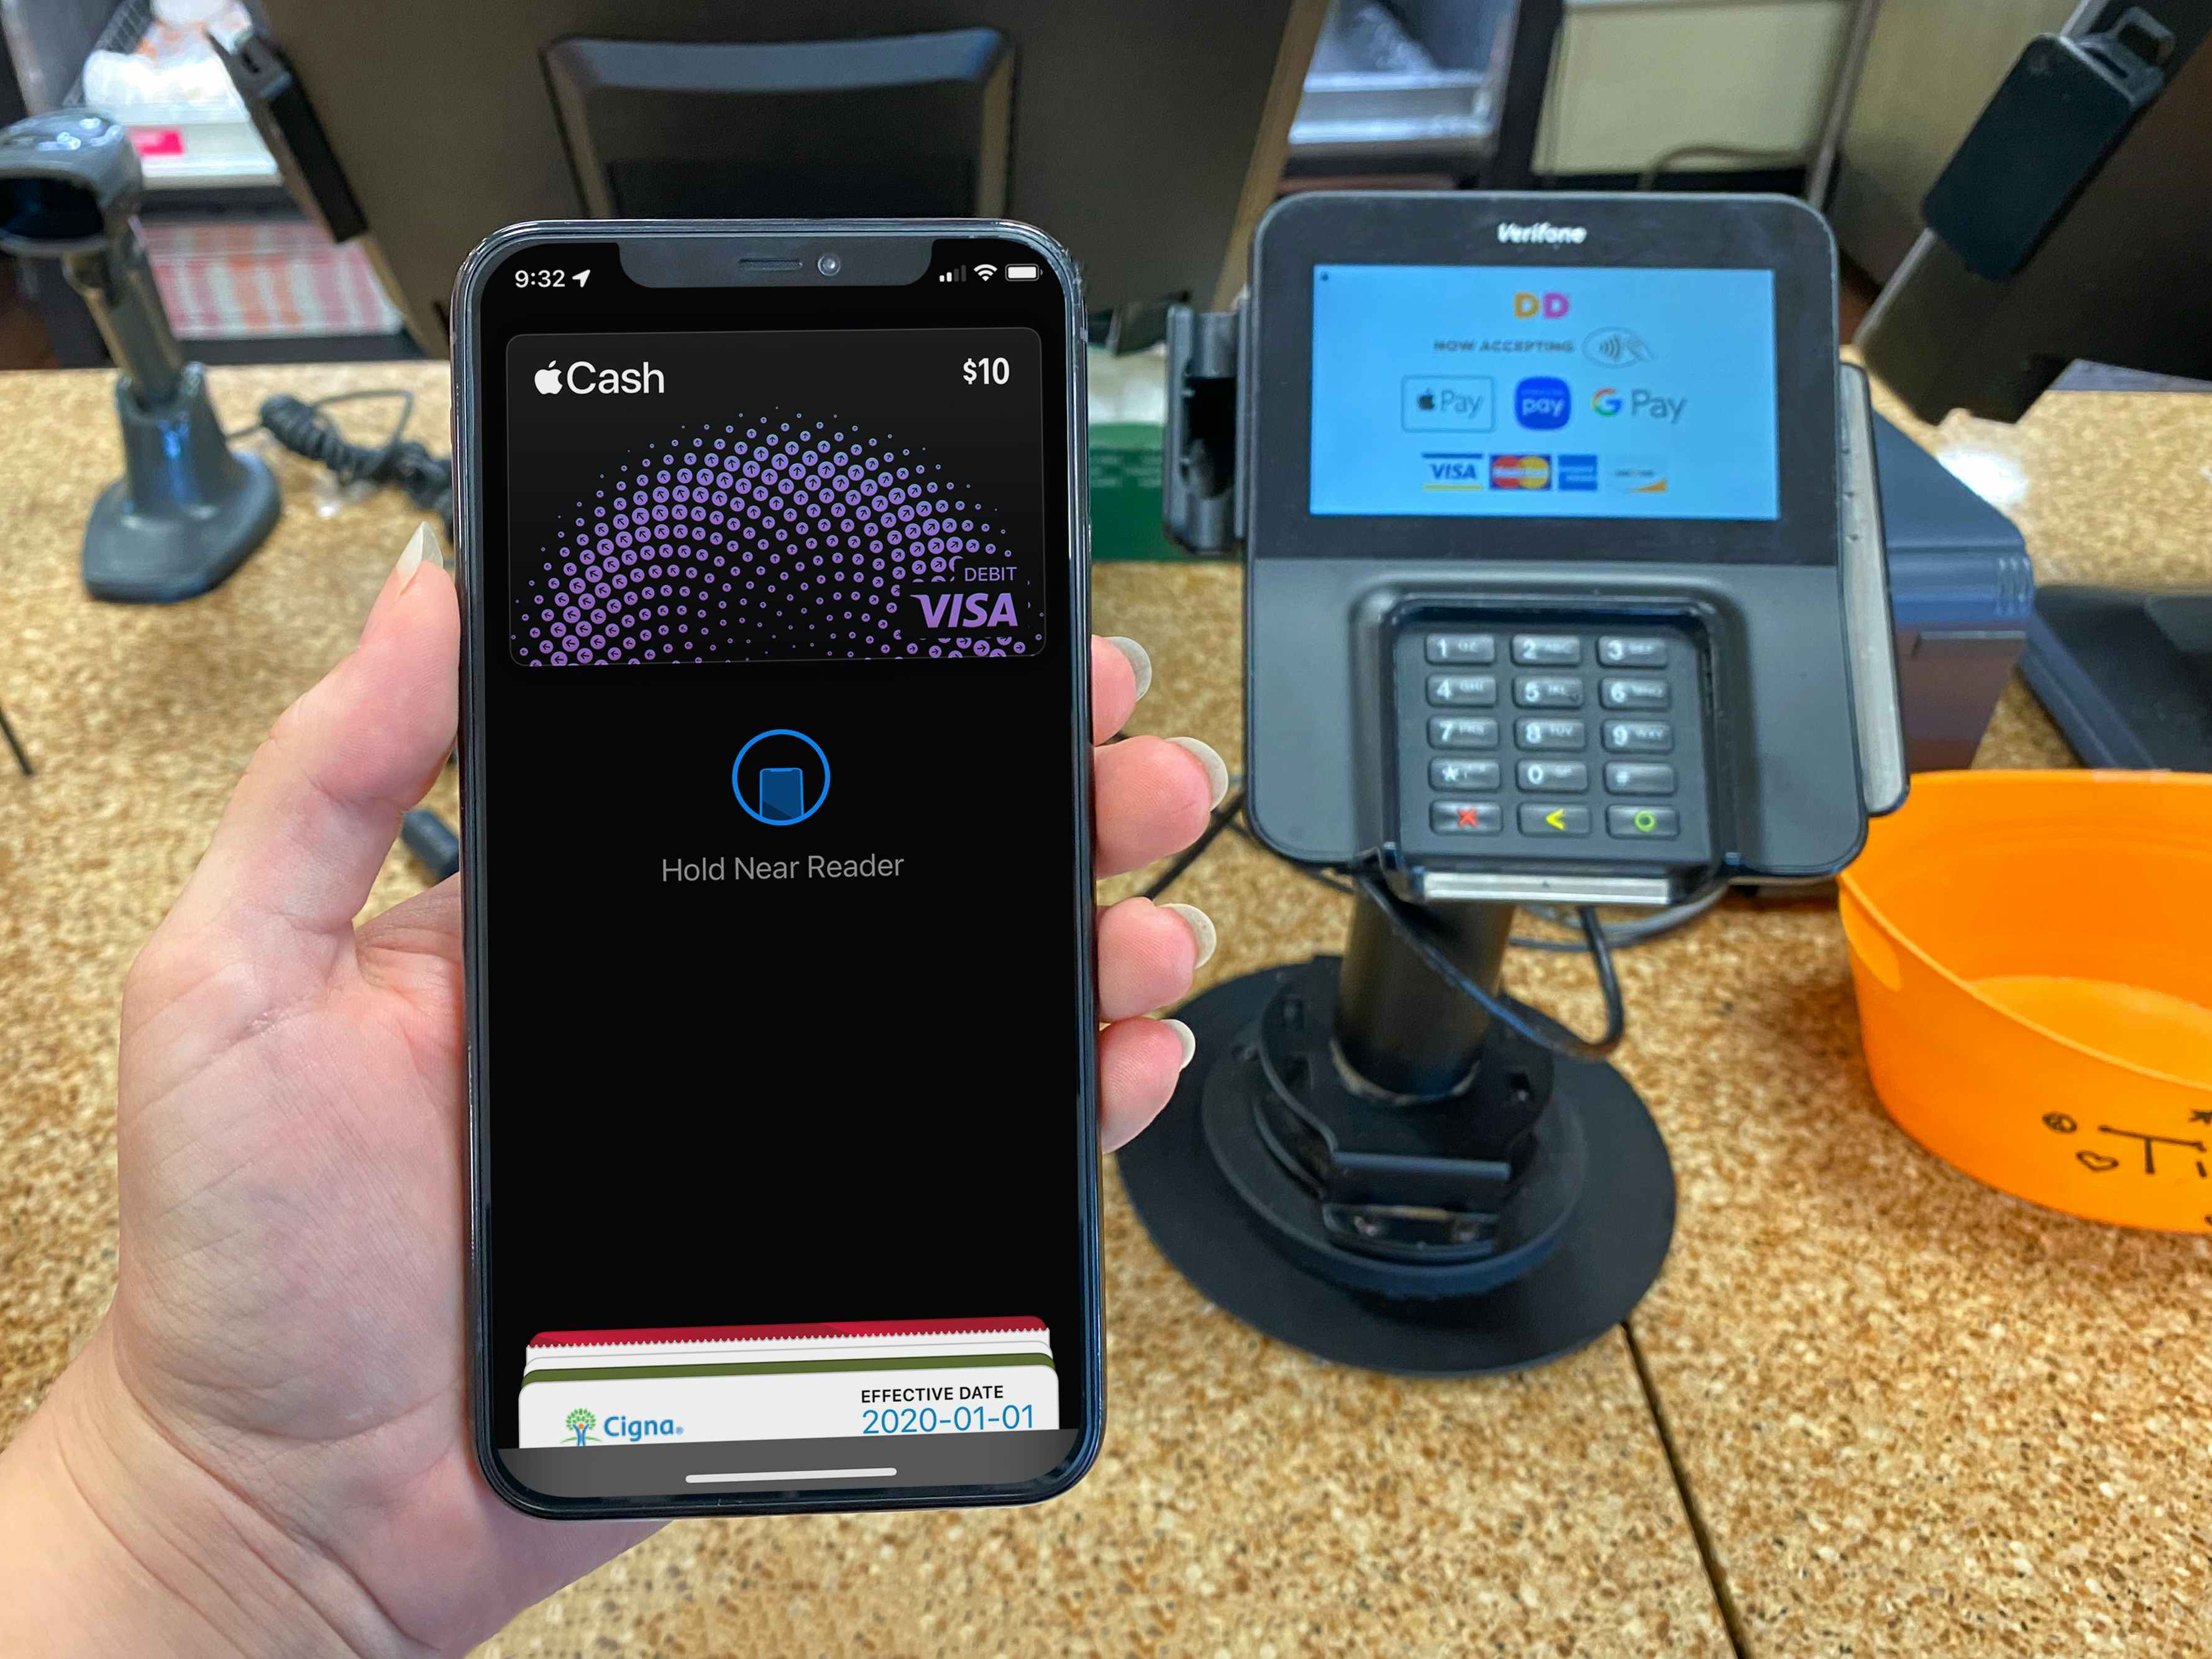 A person's hand holding up an iPhone displaying their Apple Pay page in front of the point-of-sale machine at the counter at Dunkin'.